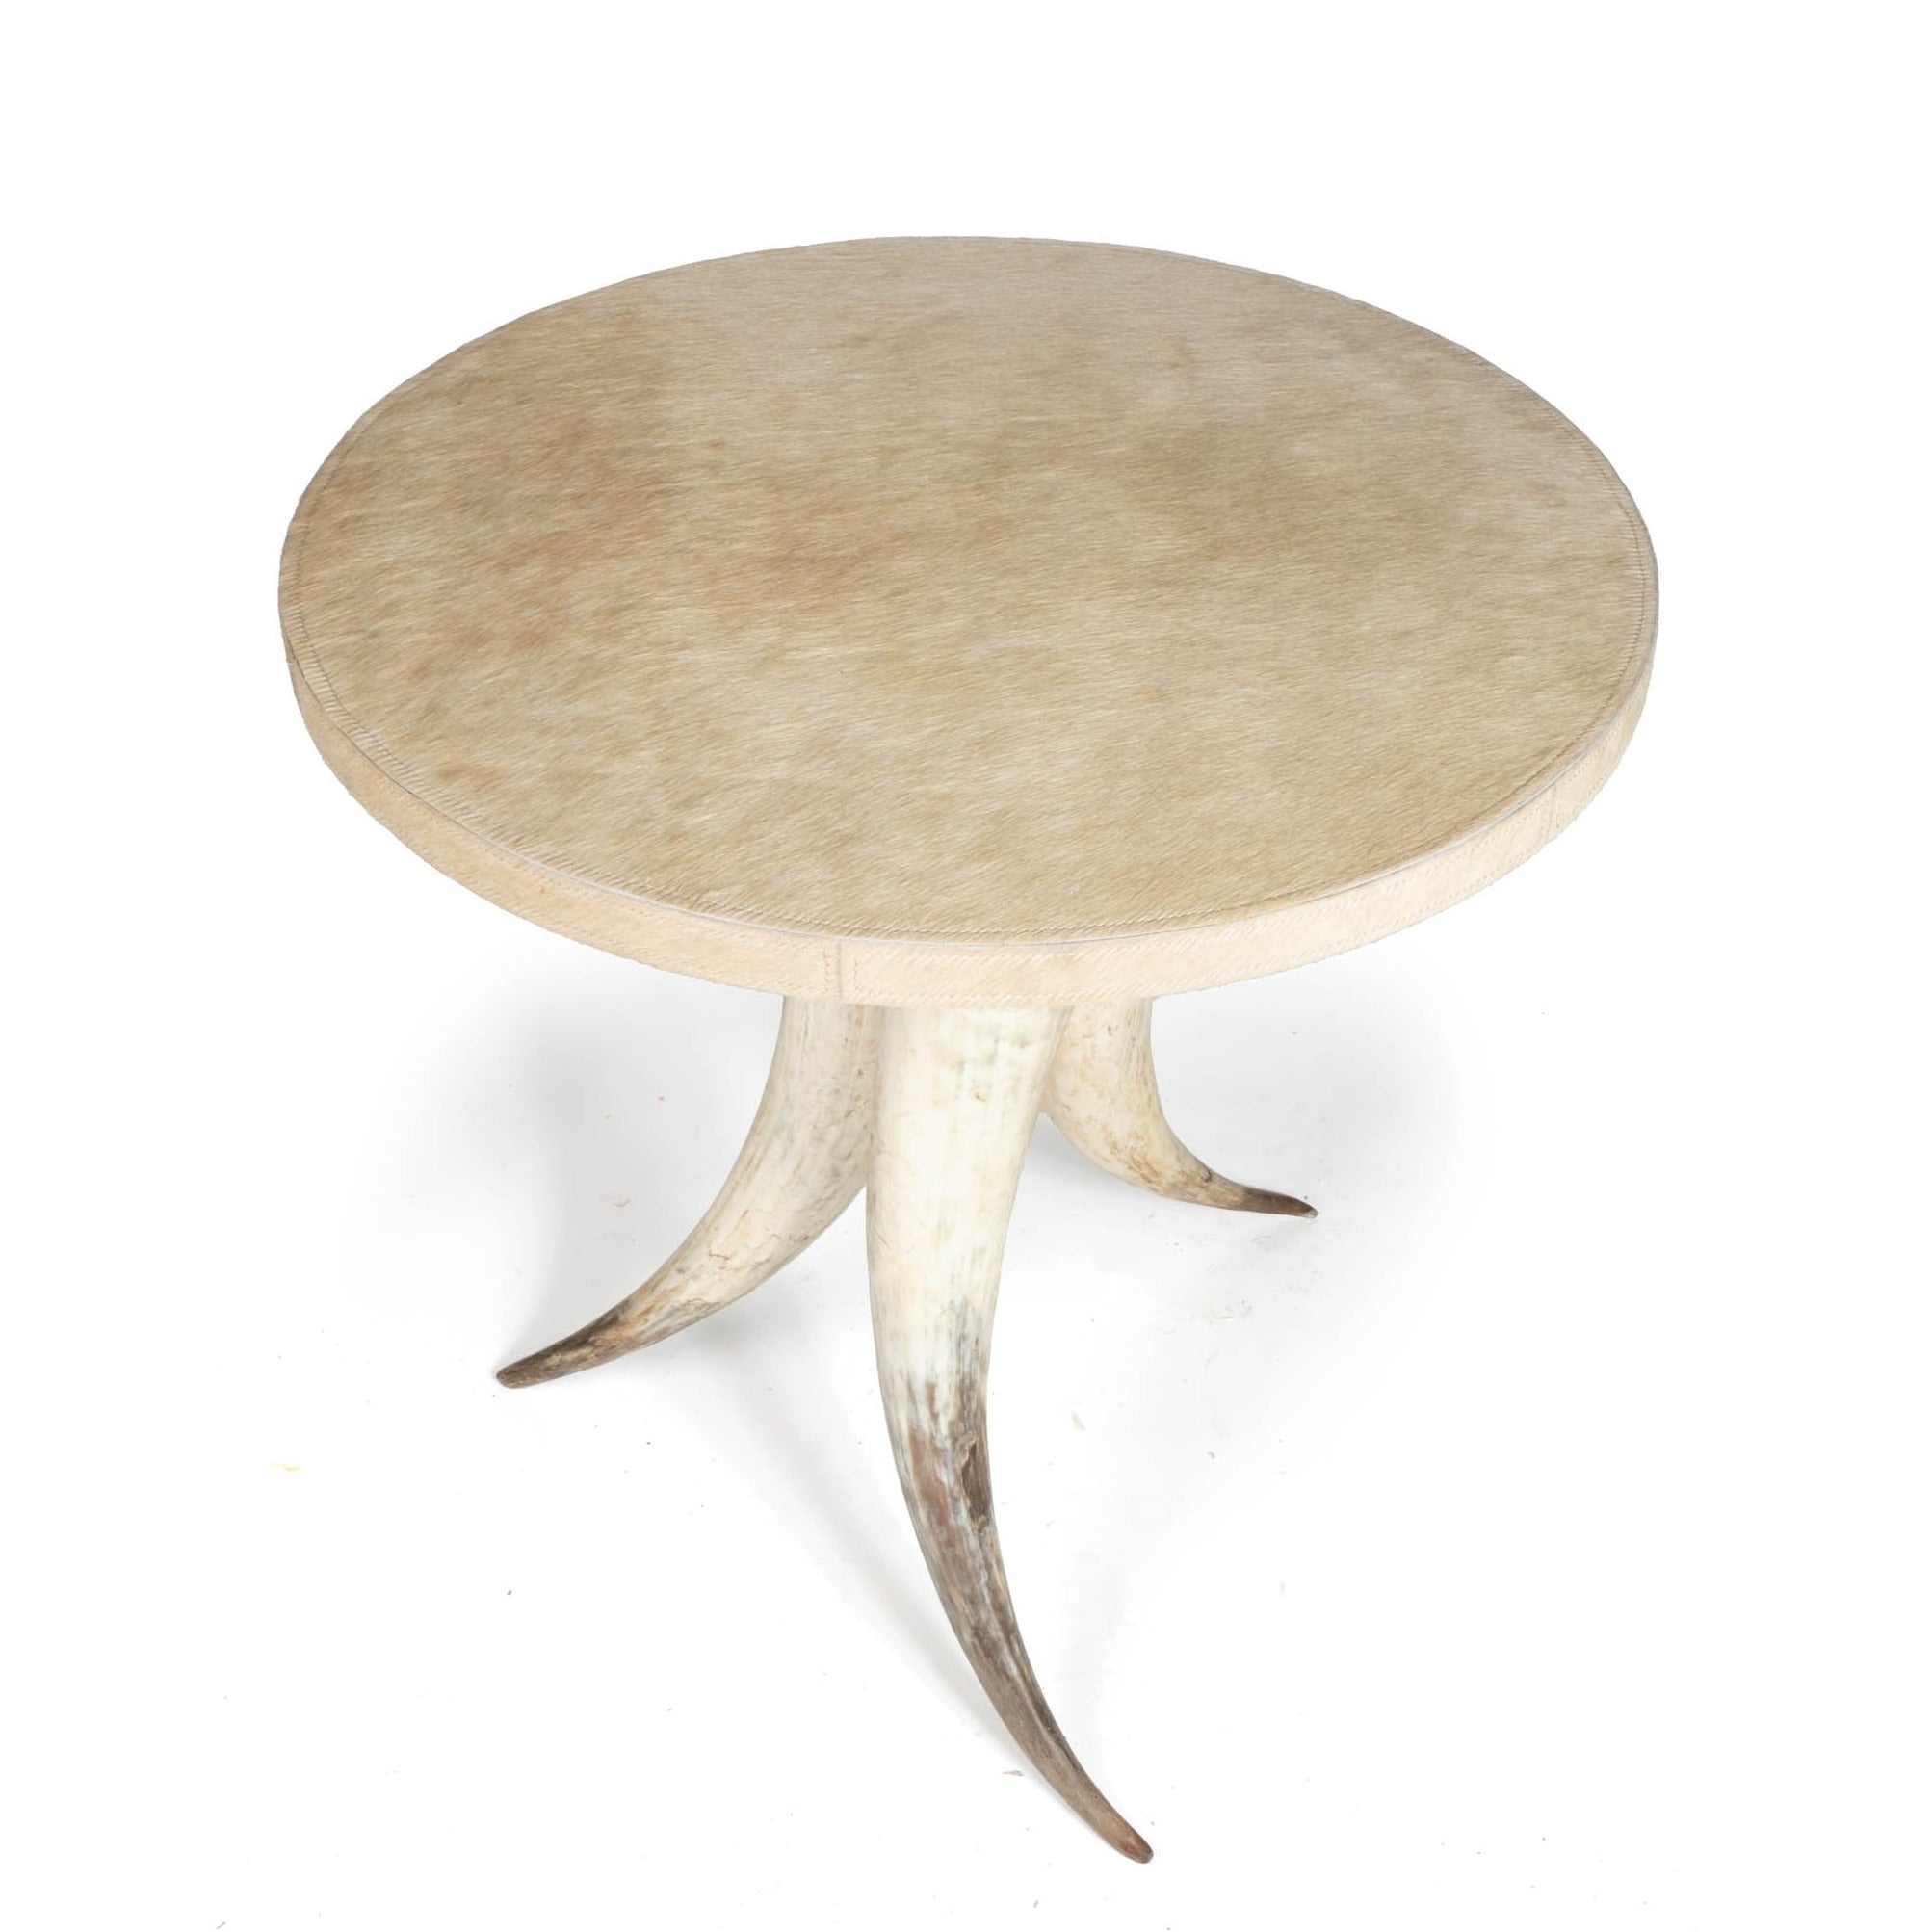 Cow Horn Table with Cream Cow Hide Top